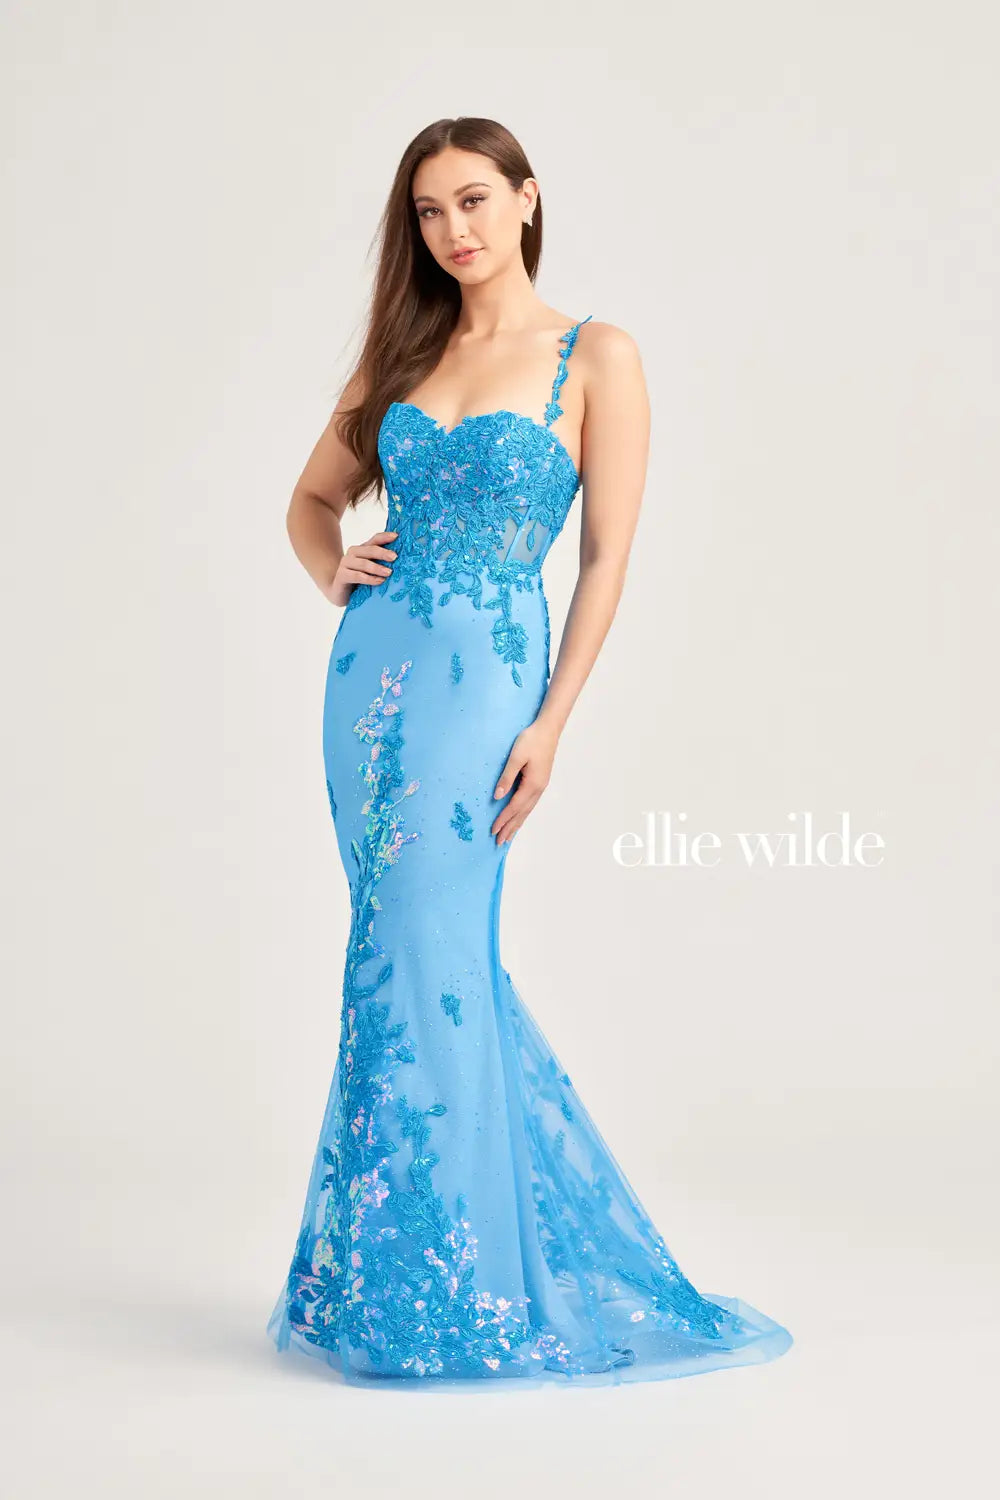 Be the center of attention in the Ellie Wilde EW35207 prom gown. Featuring a stunning lace sequin bodice with sheer corset detailing and a detachable side overskirt for added drama, this dress is perfect for pageants and prom. Turn heads and feel like a queen with this elegant and eye-catching dress.  Sizes: 00-16  Colors: Sage, Ocean Blue